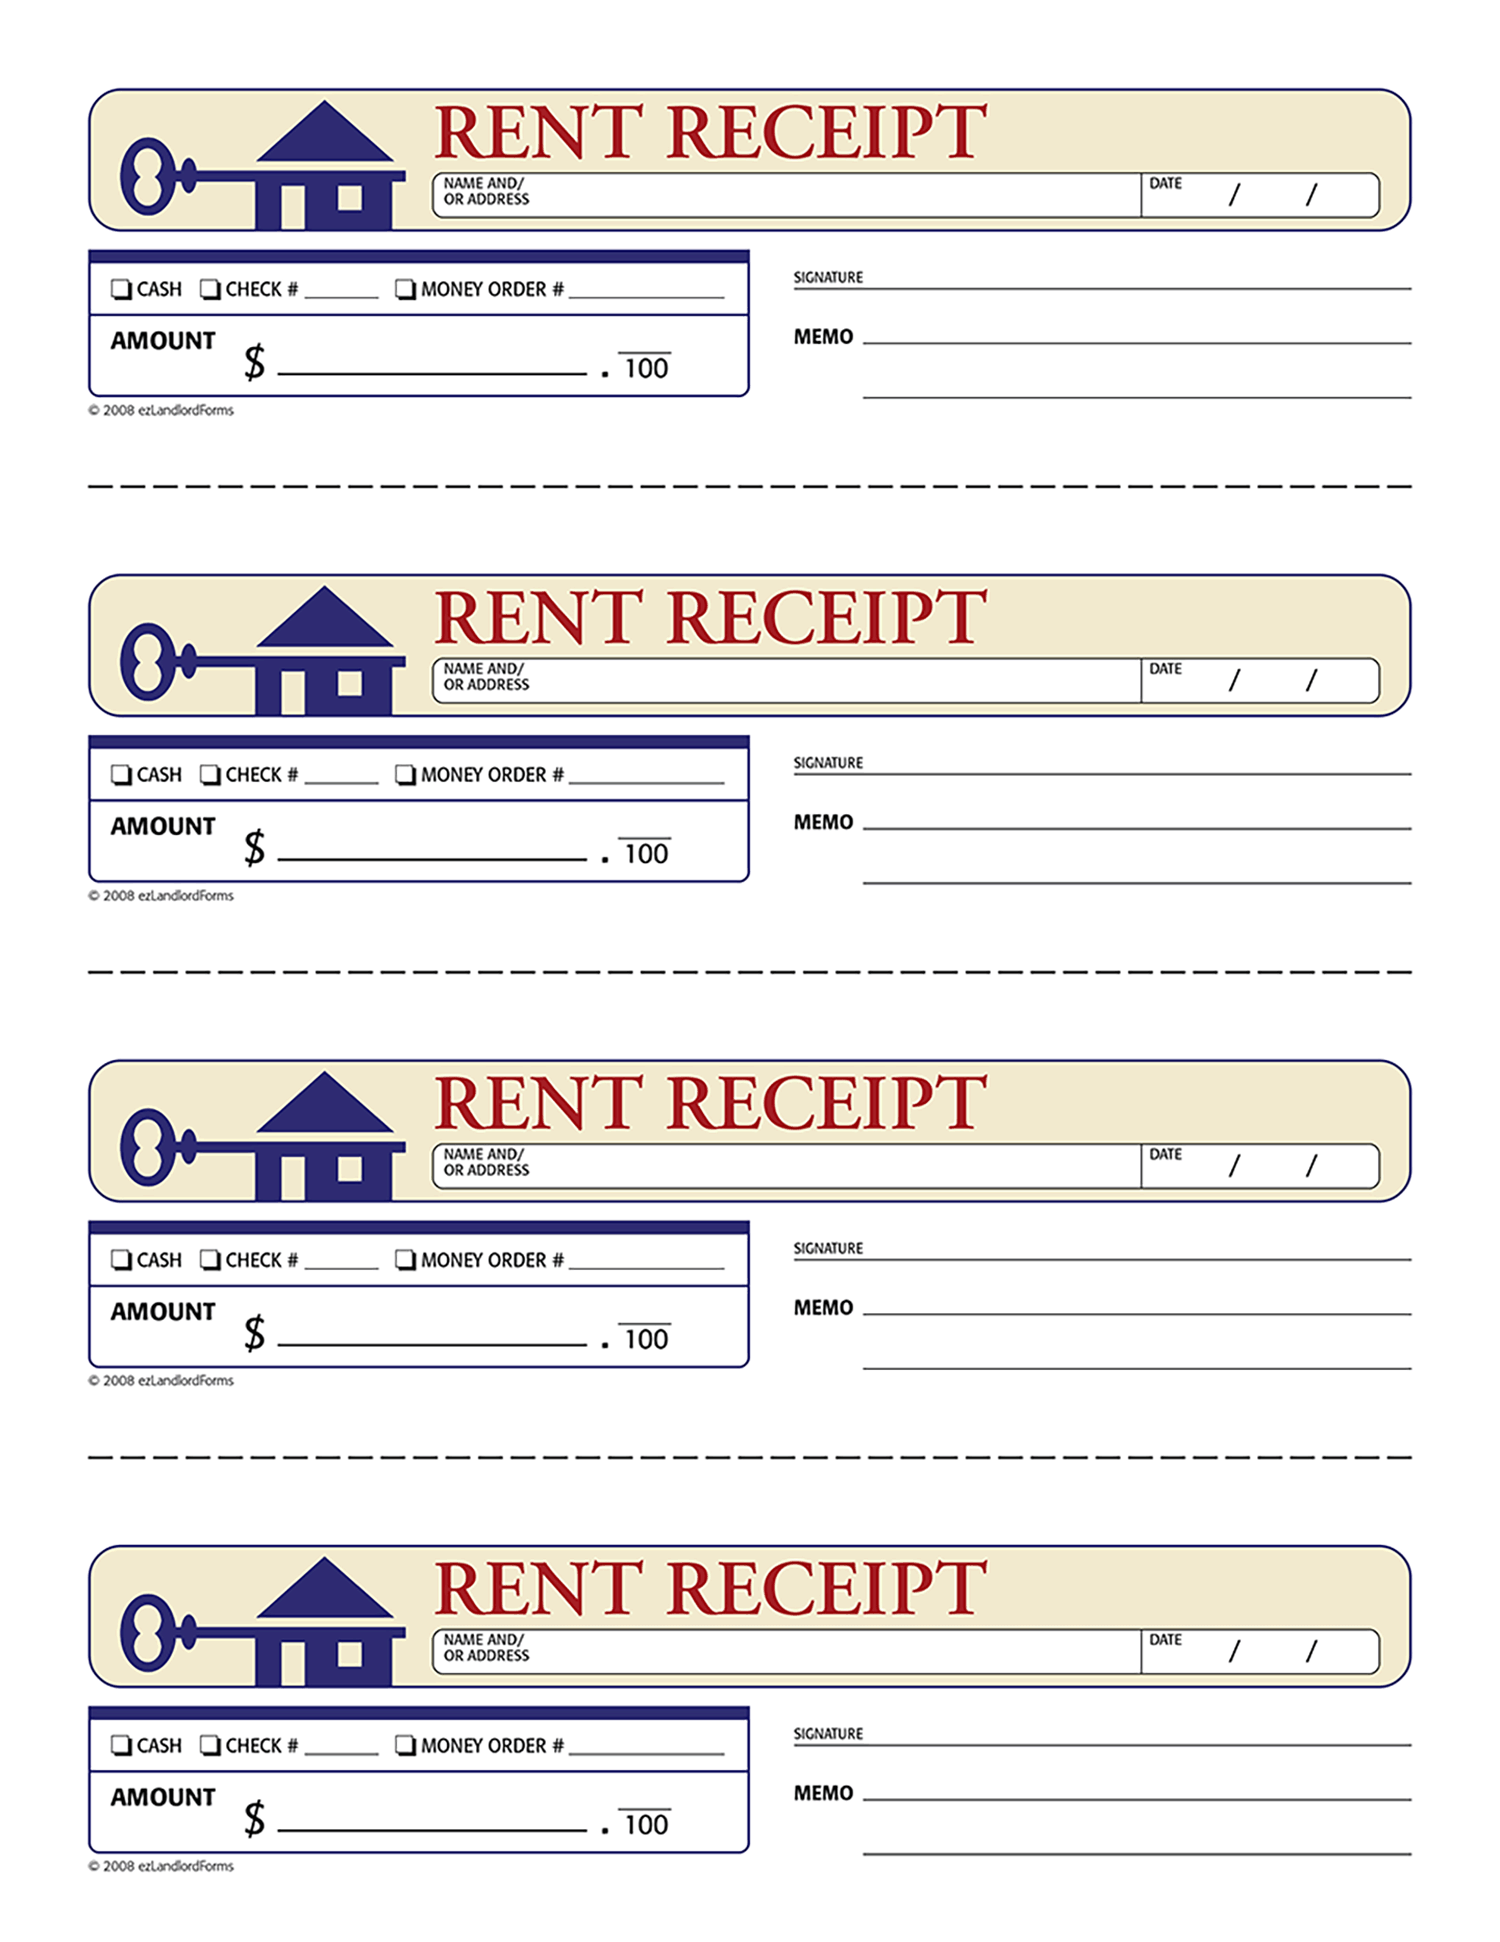 landlord-rent-receipt-tutore-org-master-of-documents